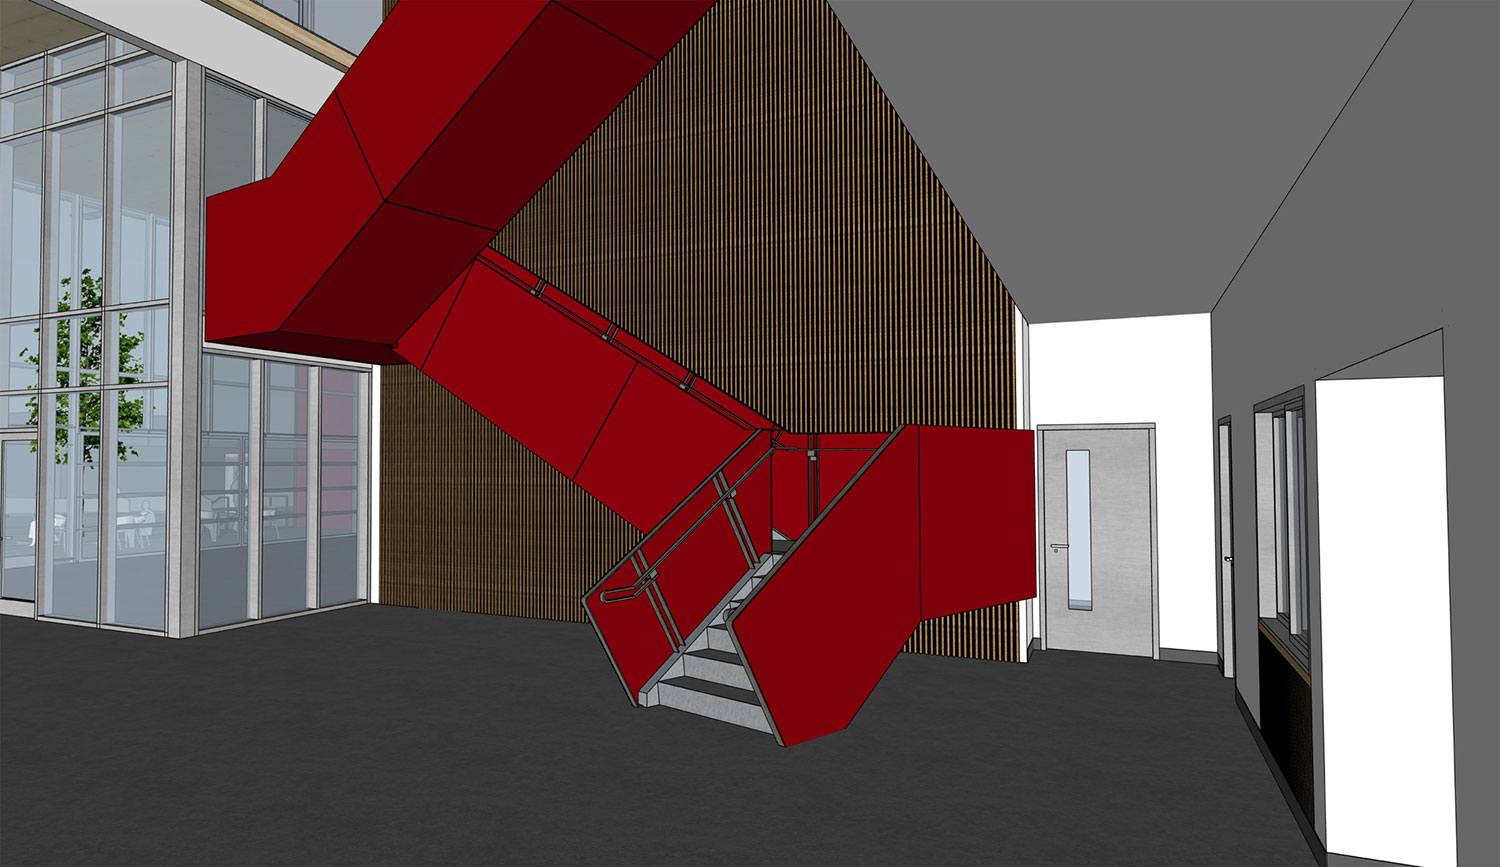 lalliance francaise du vancouver stairs 02 rendering courtesy mcfarland marceau architects